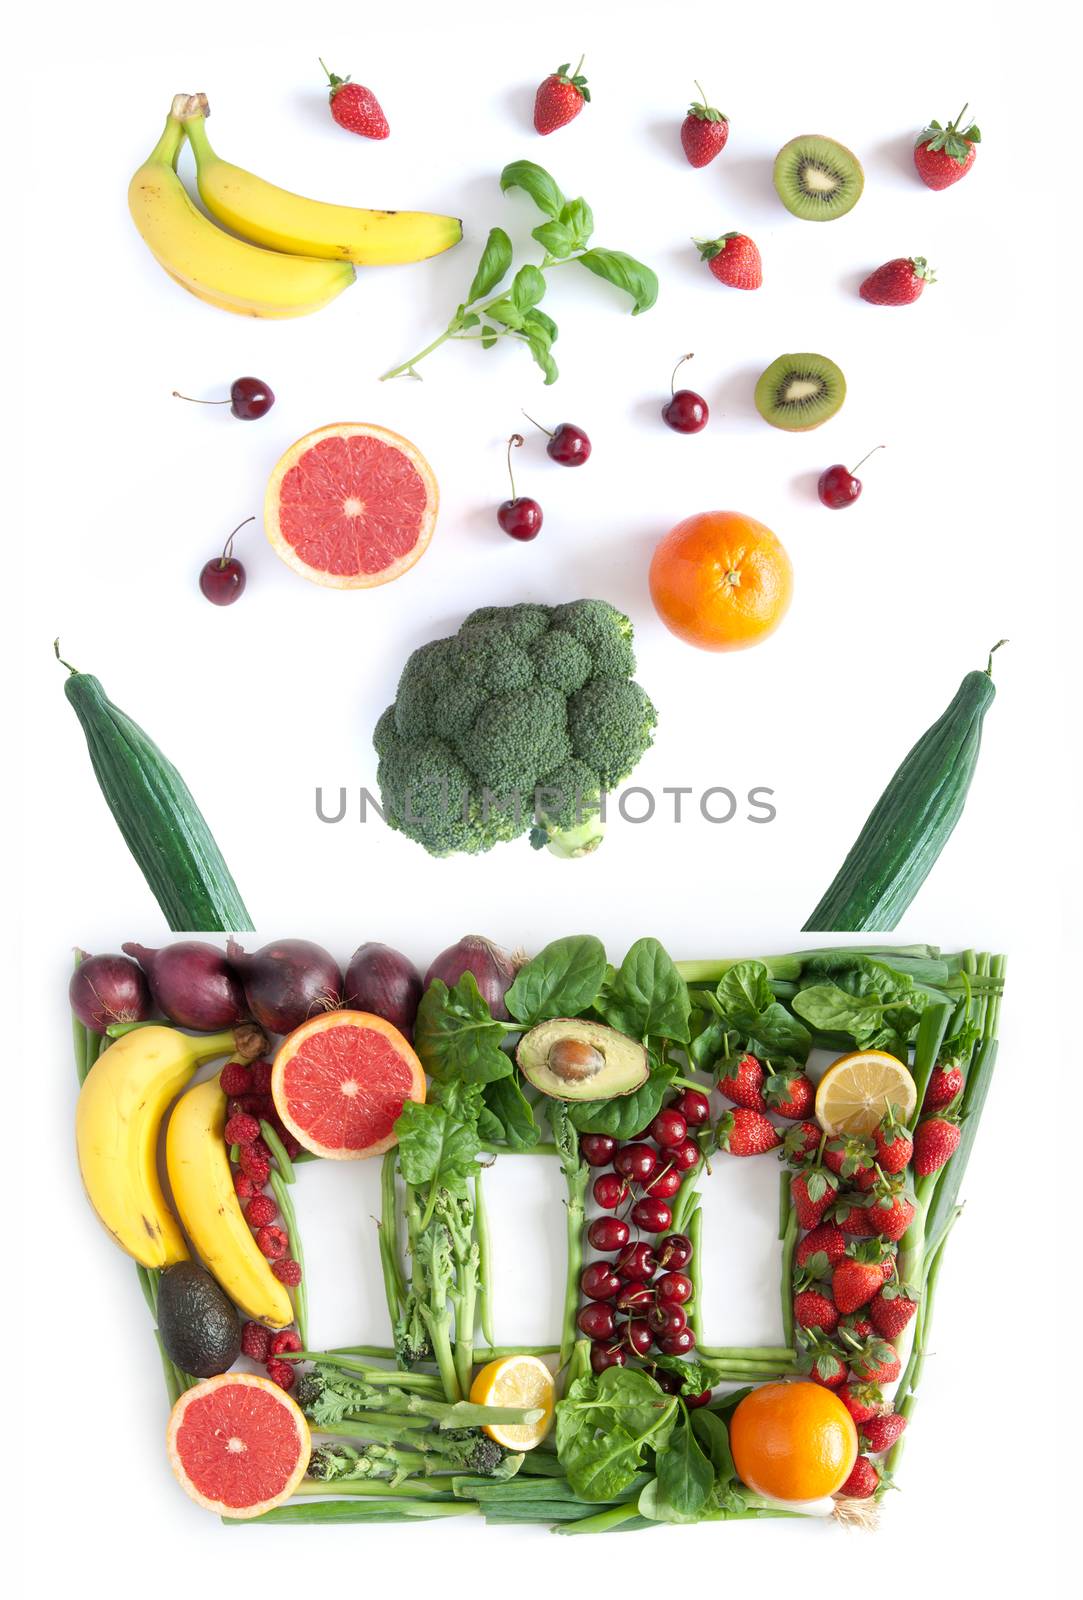 Food falling into a grocery basket made of food over a white background 